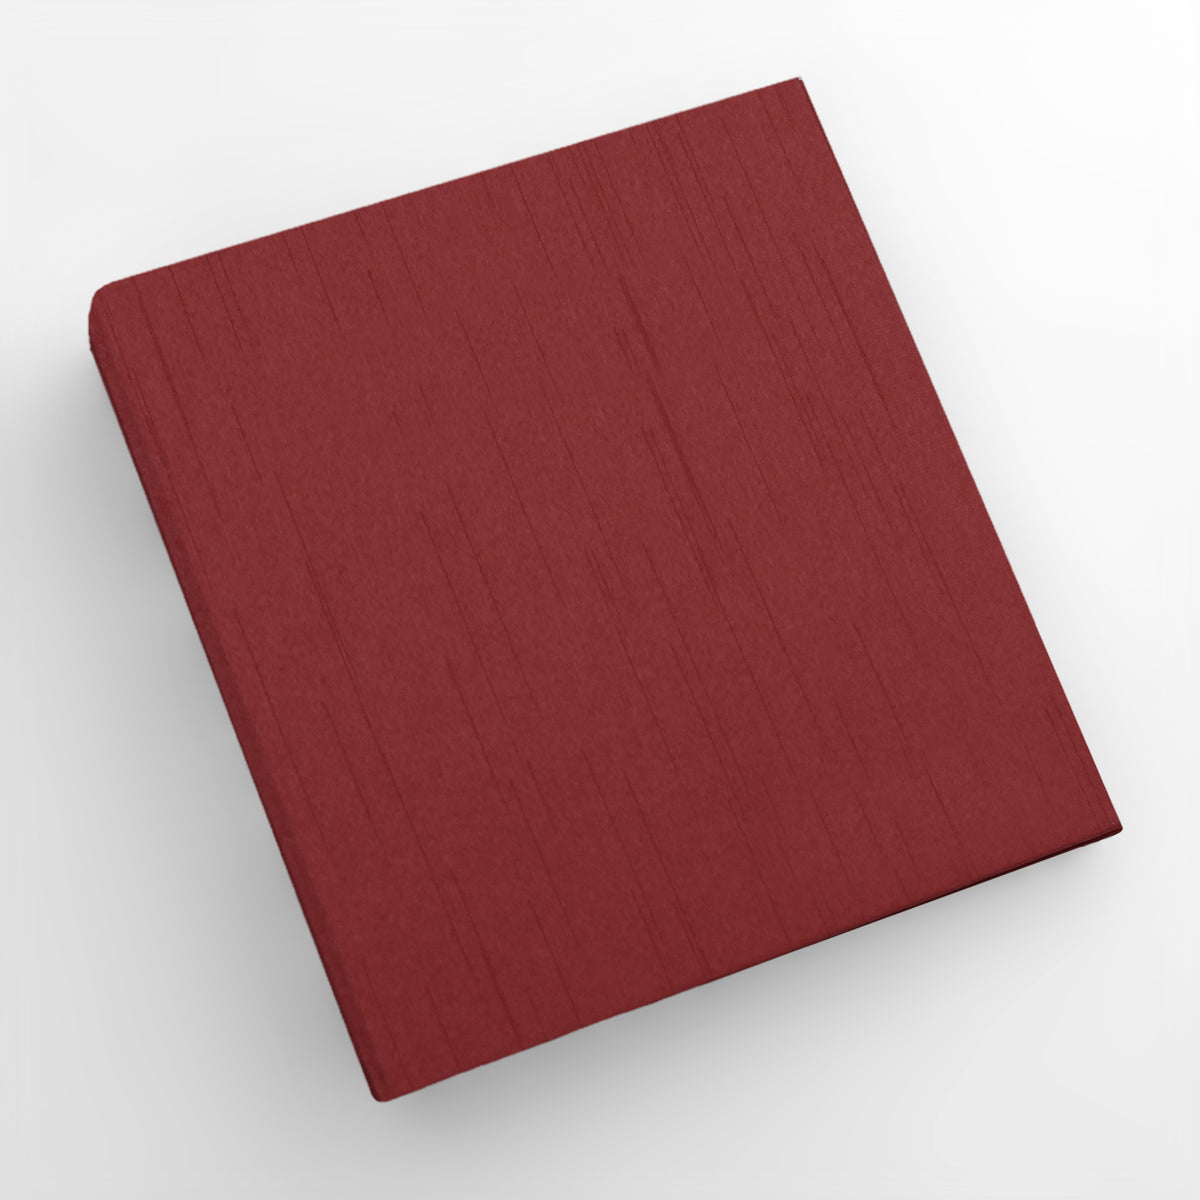 Large Photo Binder For 8x10 Photos | Cover: Garnet Silk | Available Personalized